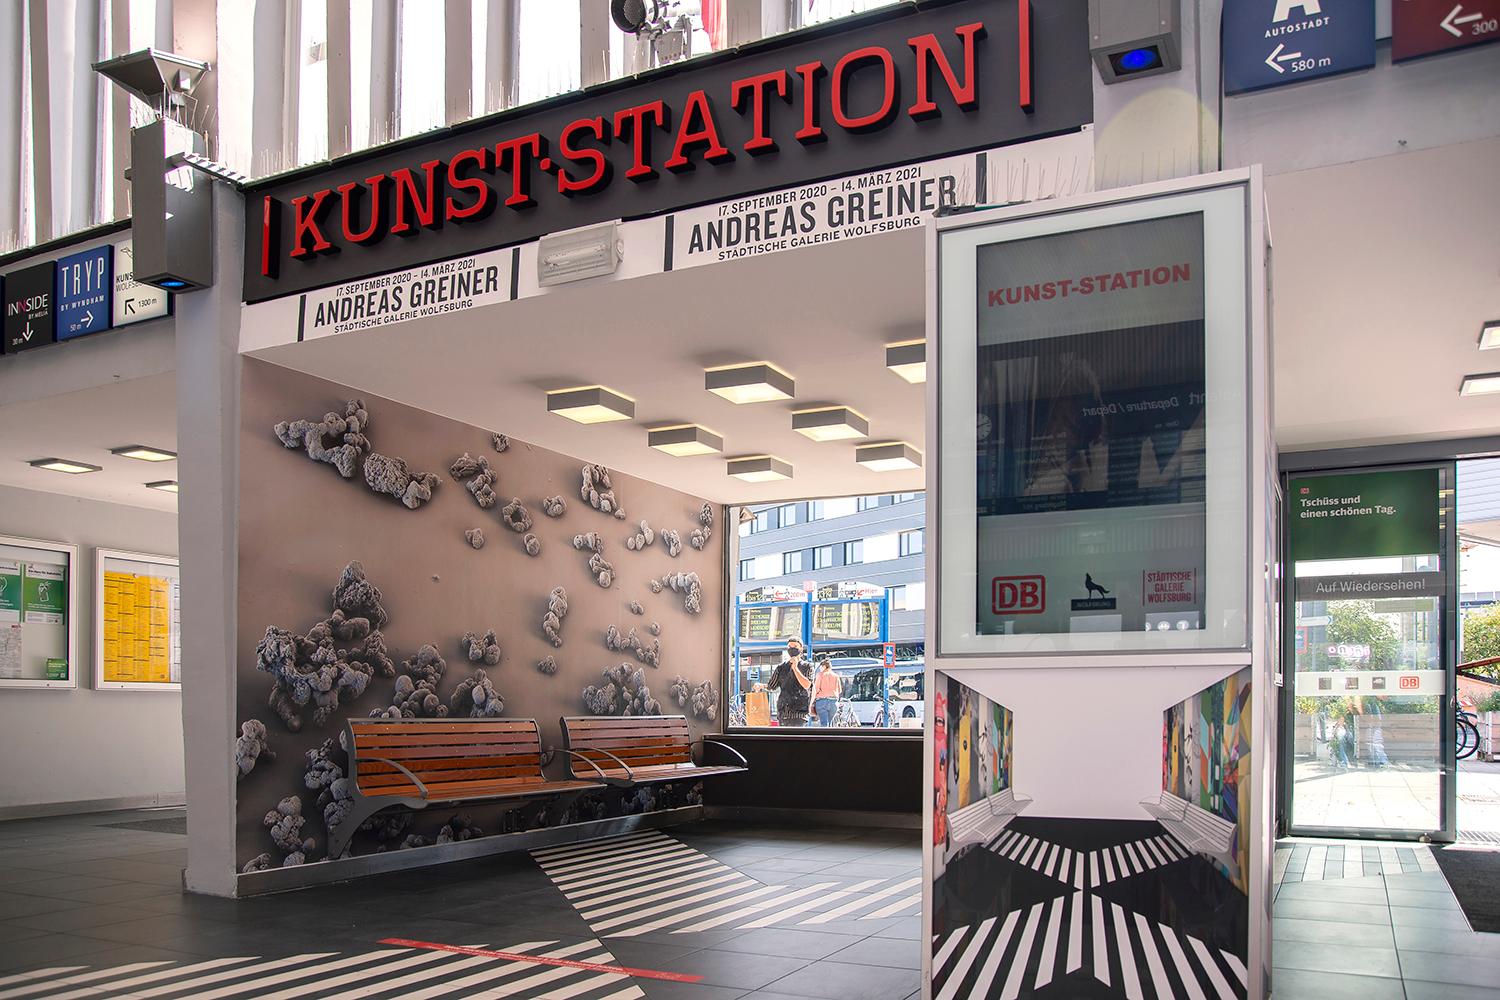 The view of the waiting area of the KUNST-STATION in Wolfsburg Hauptbahnhof, artistically designed by Andreas Greiner.